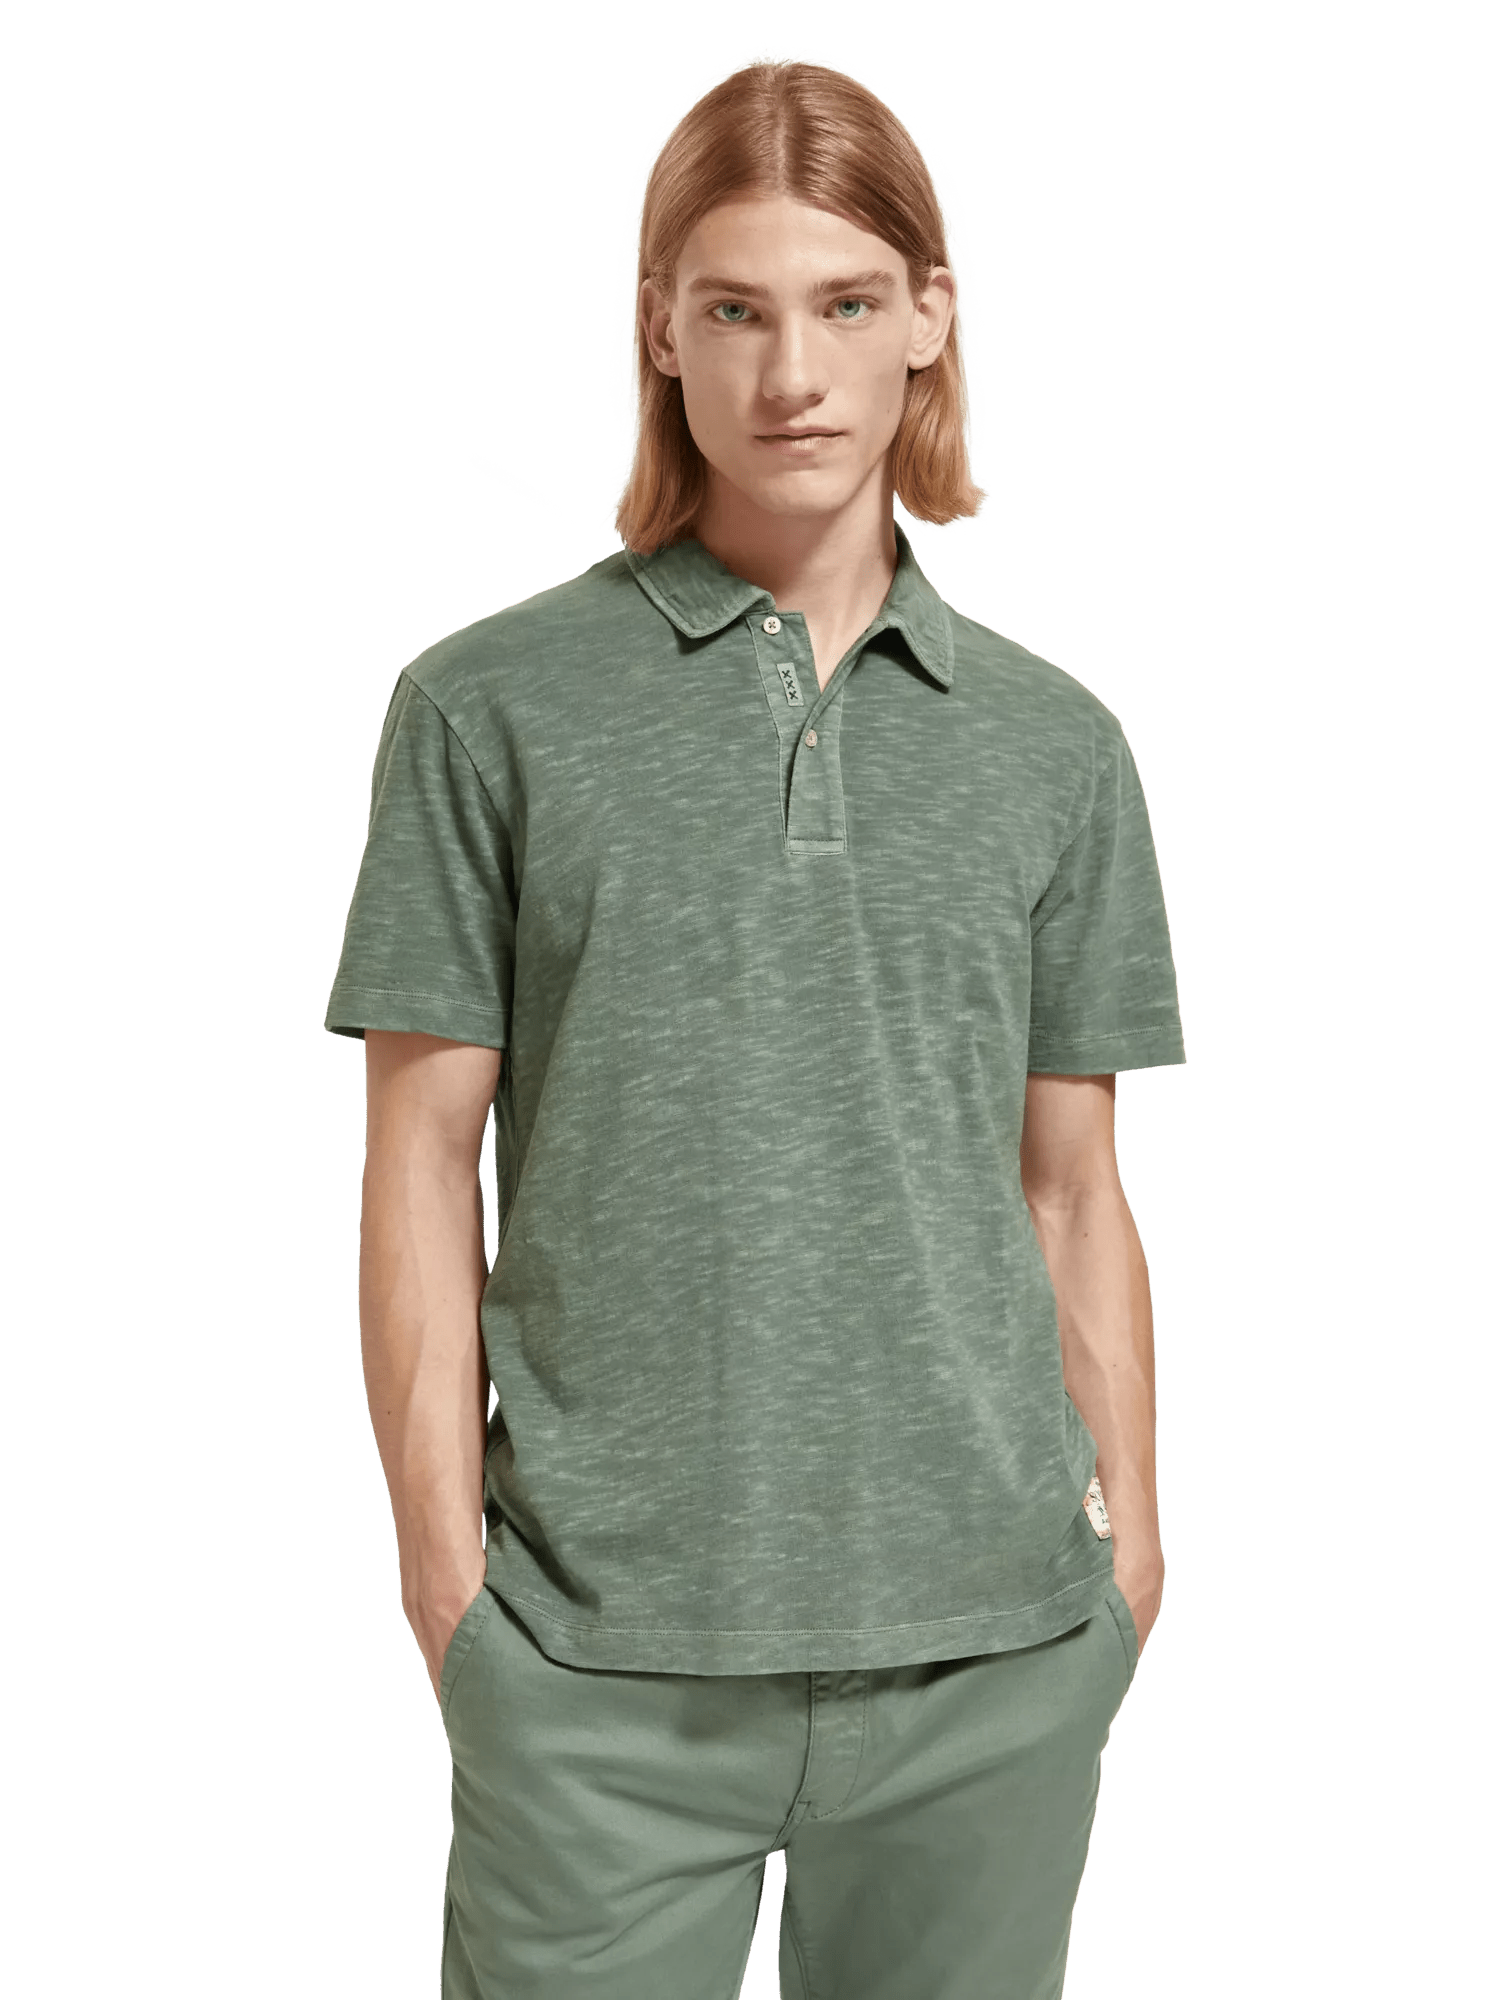 Scotch & Soda Garment-dyed jersey polo in Organic Cotton 174564_1081_MDL_CRP